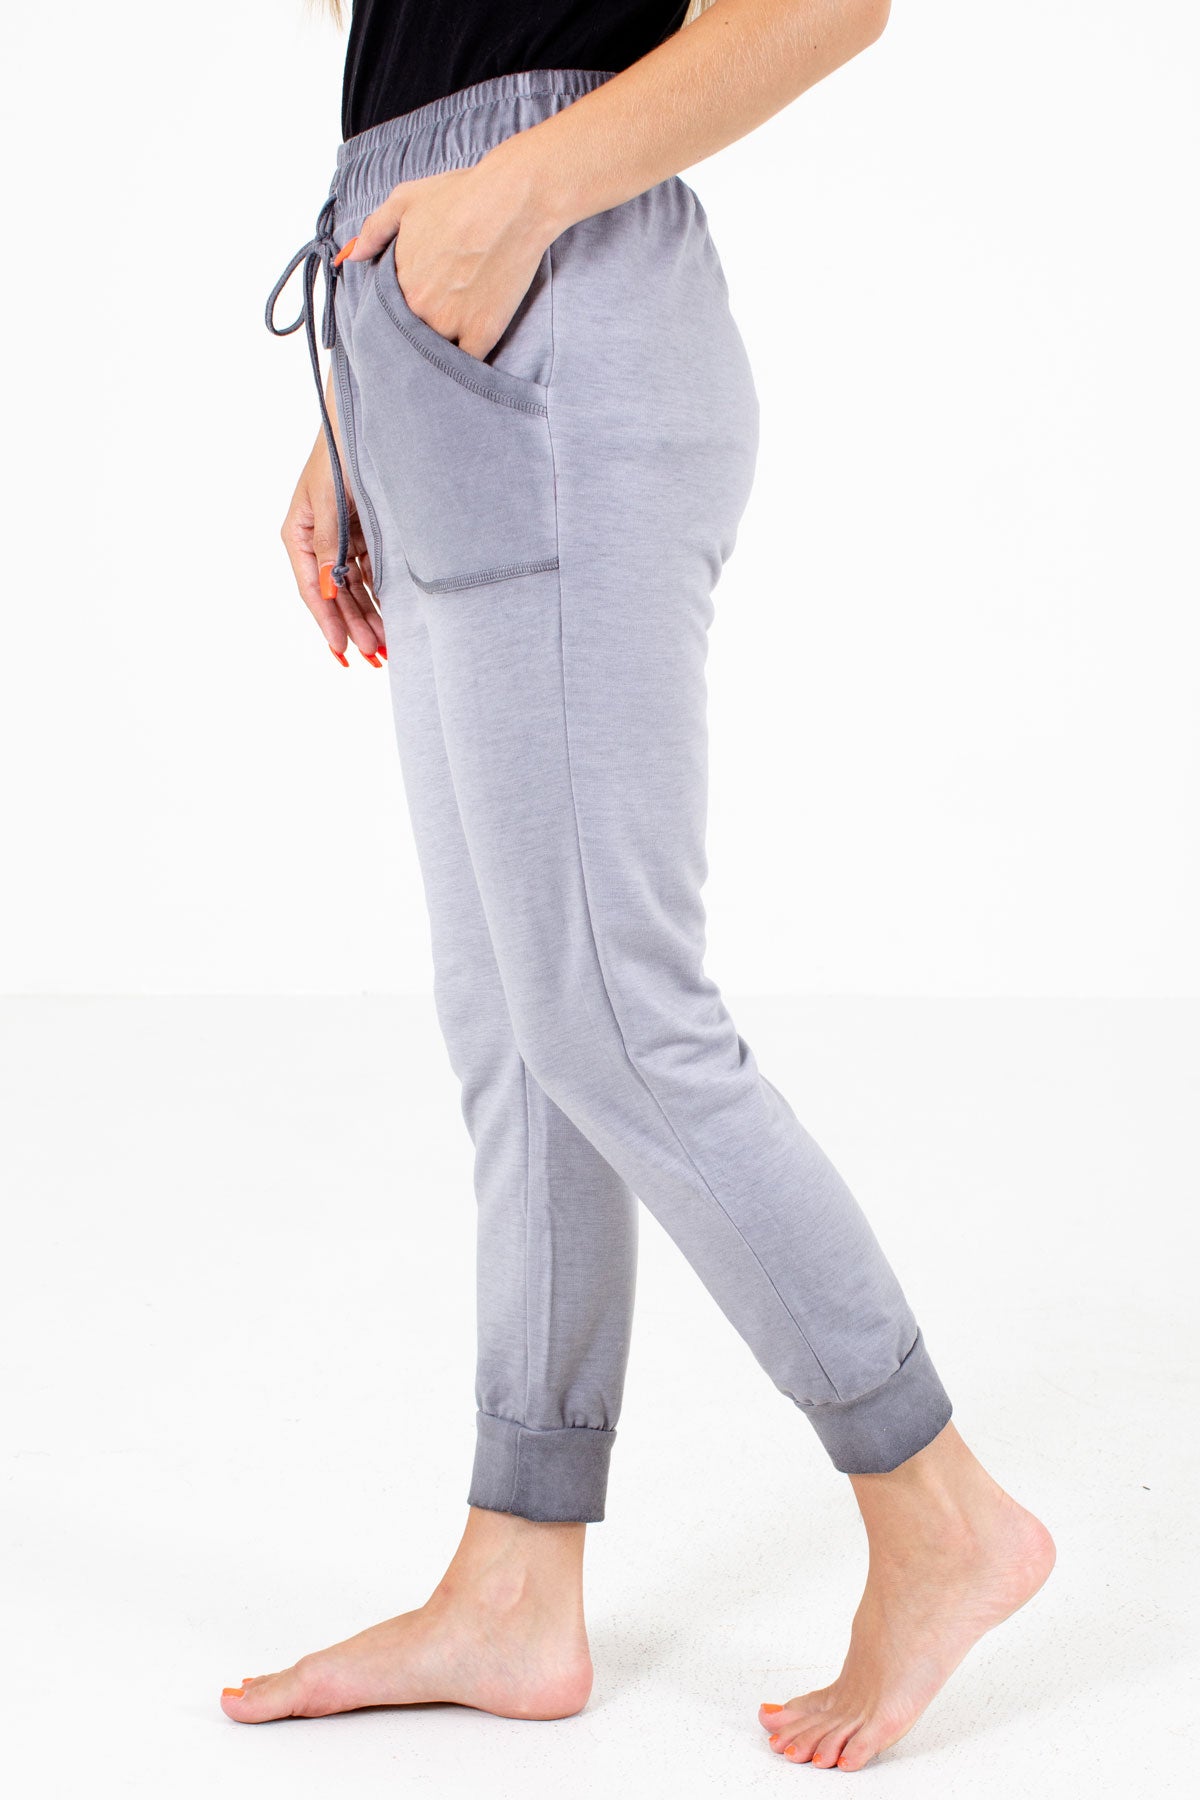 Gray Cute and Comfortable Boutique Lounge Pants for Women